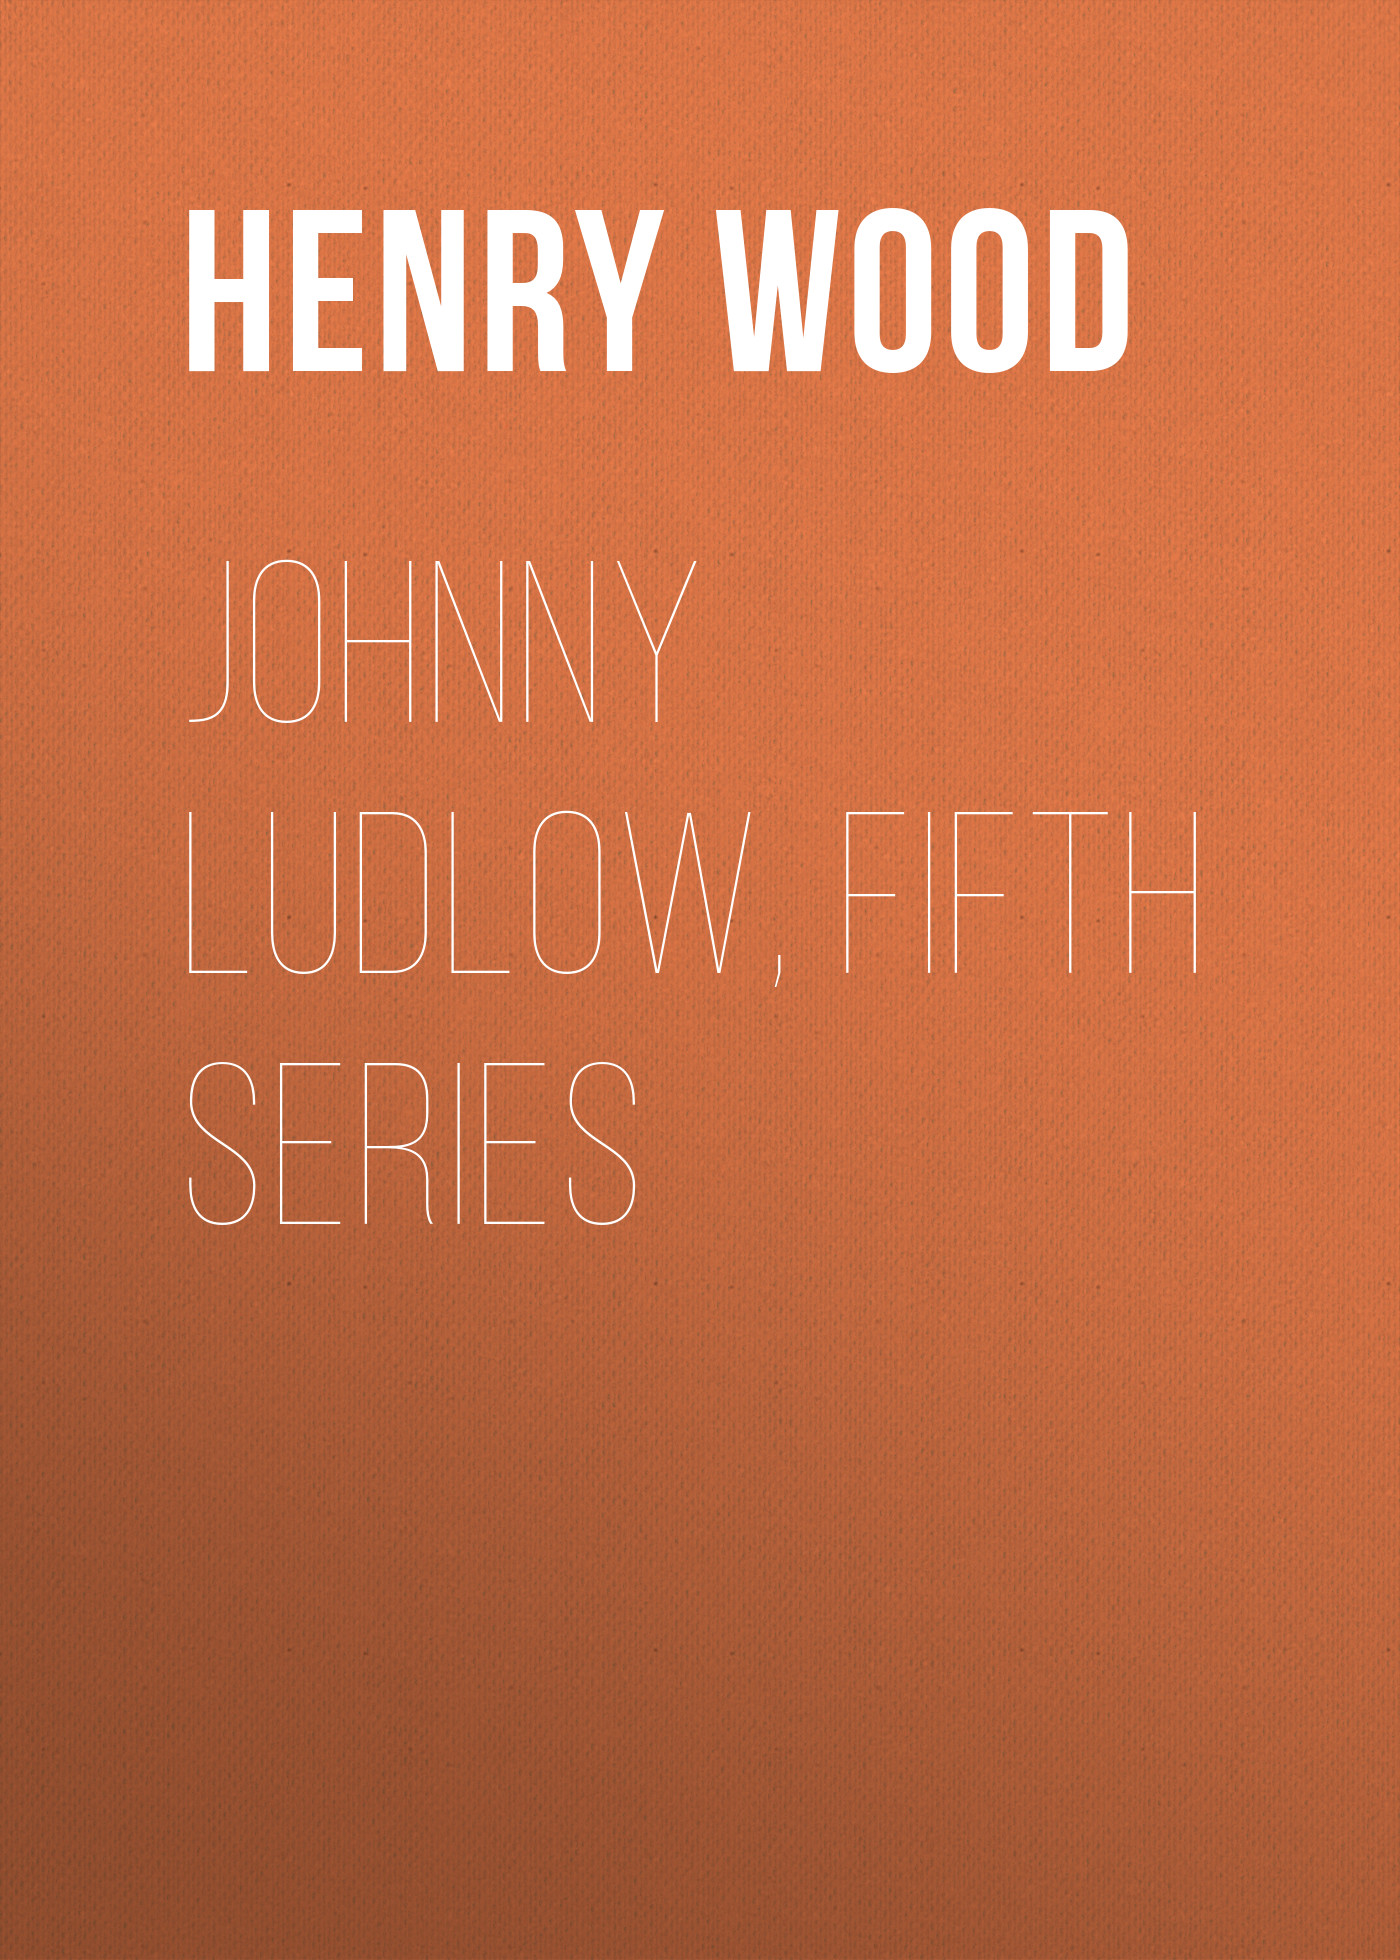 Henry Wood Johnny Ludlow, Fifth Series